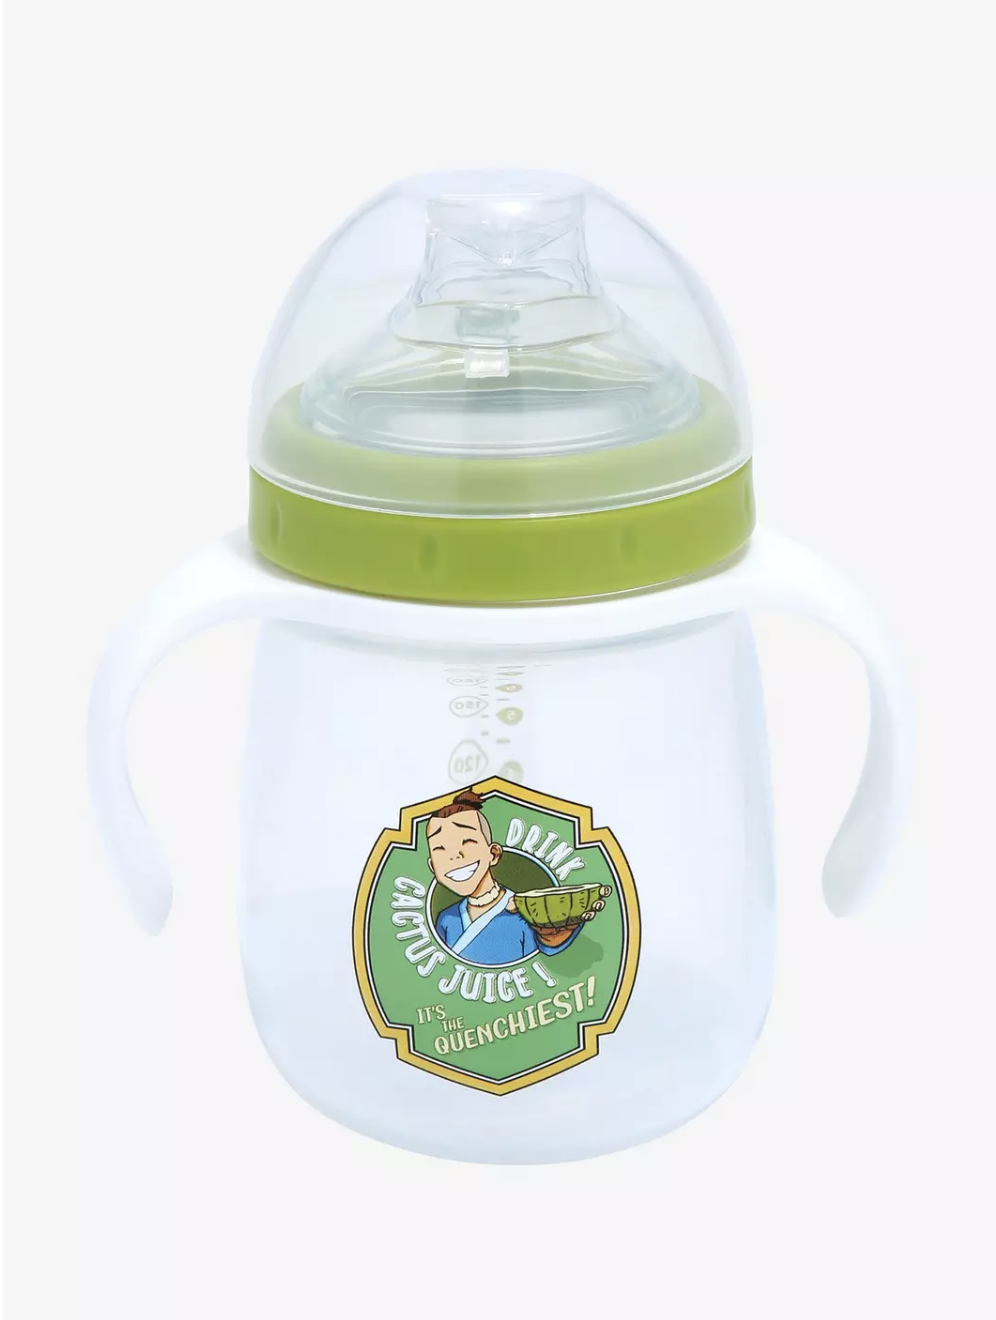 Sokka on a sippy cup with text &quot;Drink Cactus Juice! It&#x27;s The Quenchiest&quot;